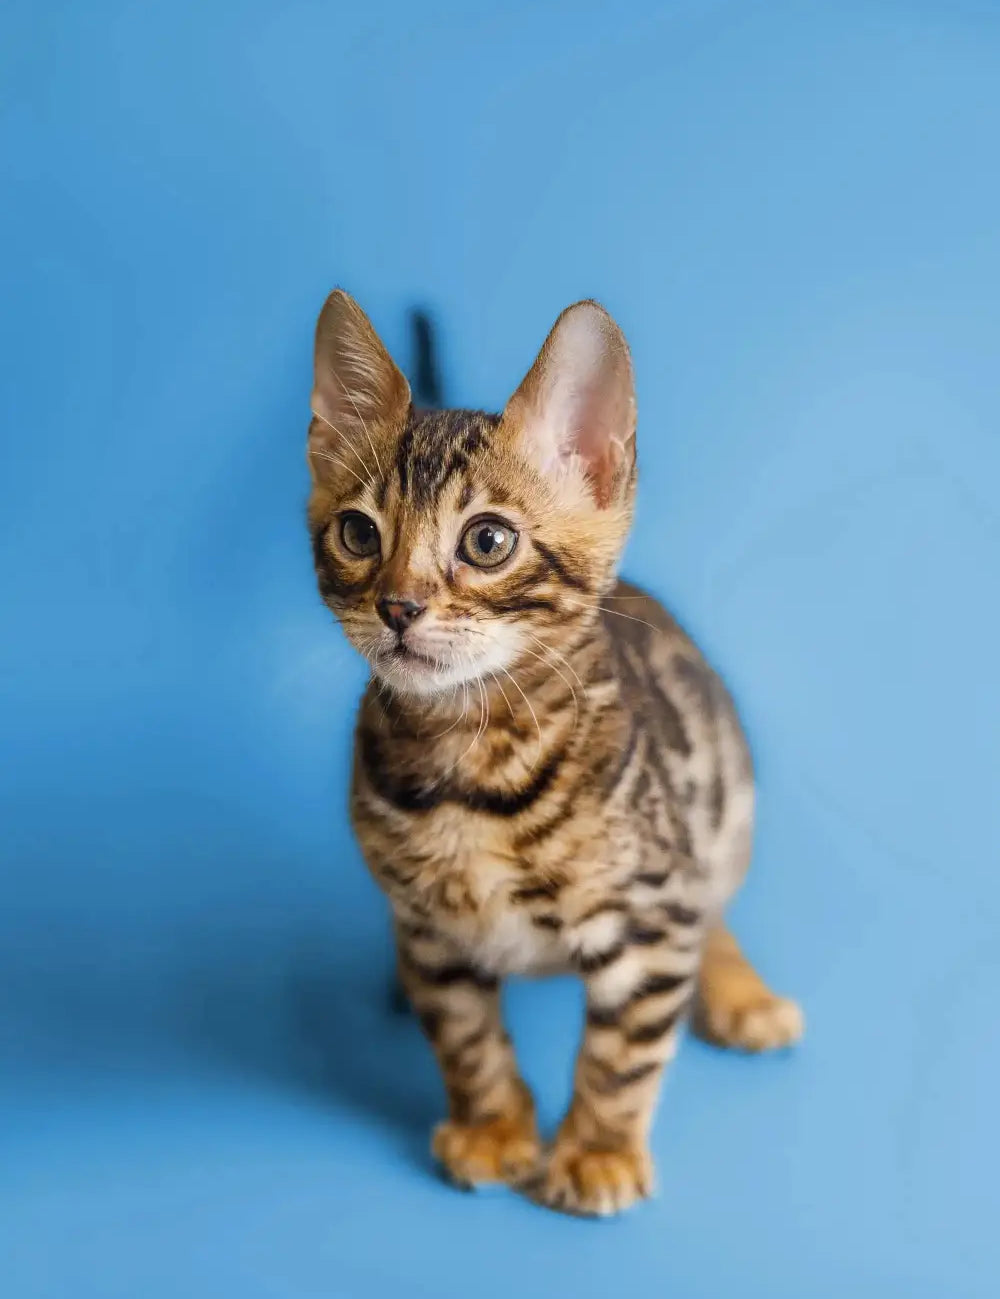 What Makes Bengal Cats Tick